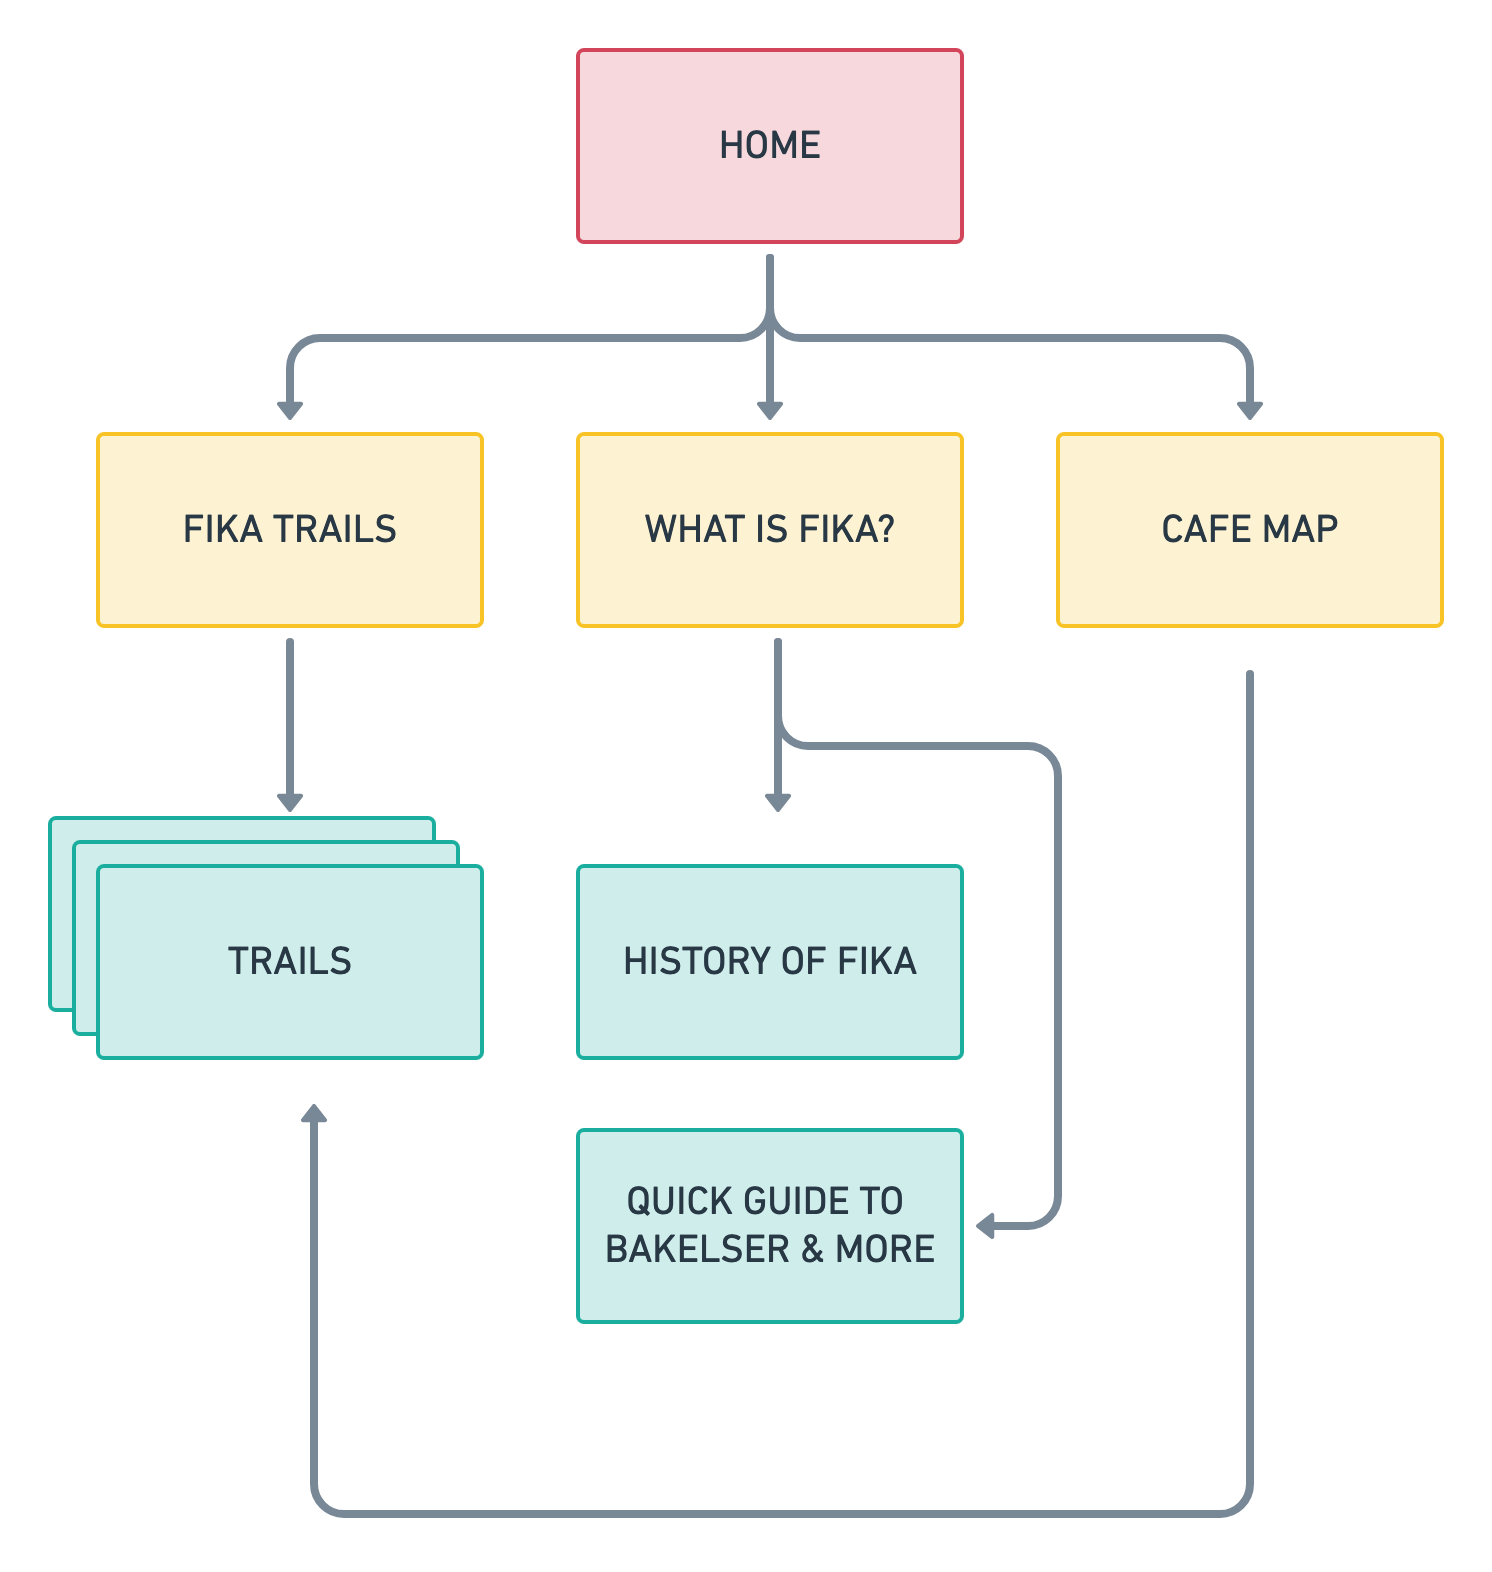 the initial proposal for fikatrail's information architecture, showing three main content areas from the home page